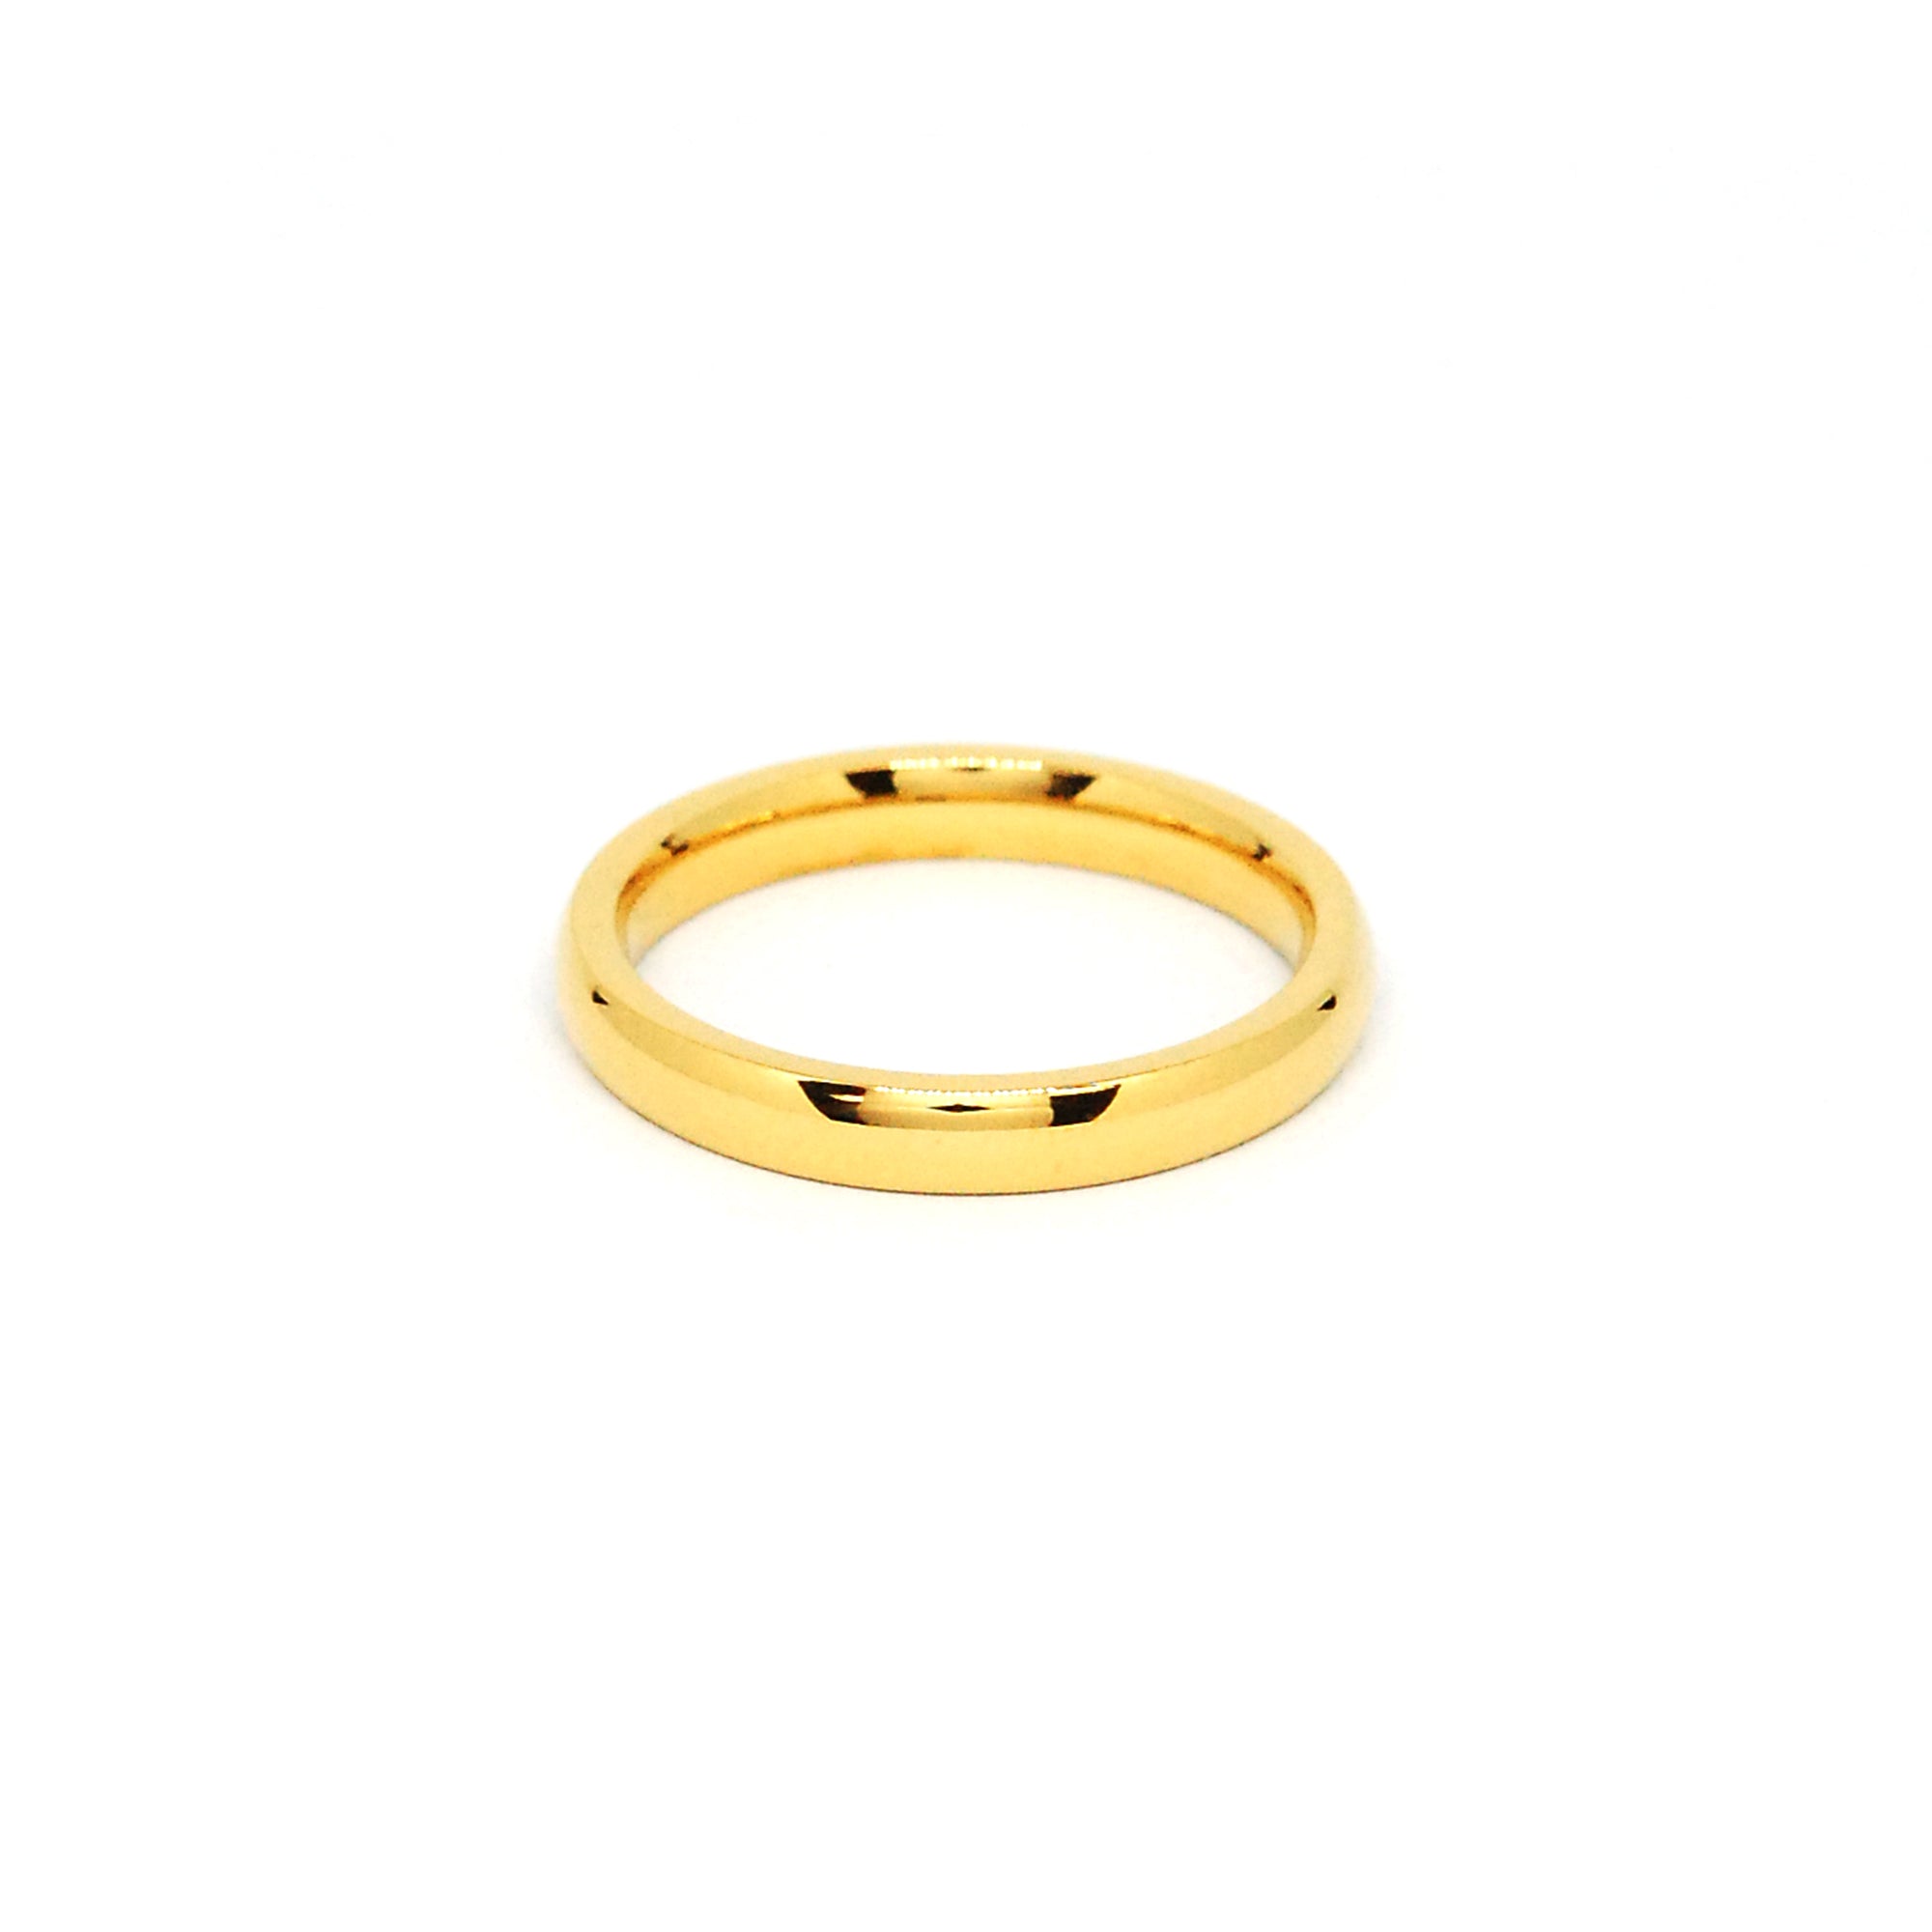 ESR 7816: Tessie Rounded Gold-Plated 3mm Band